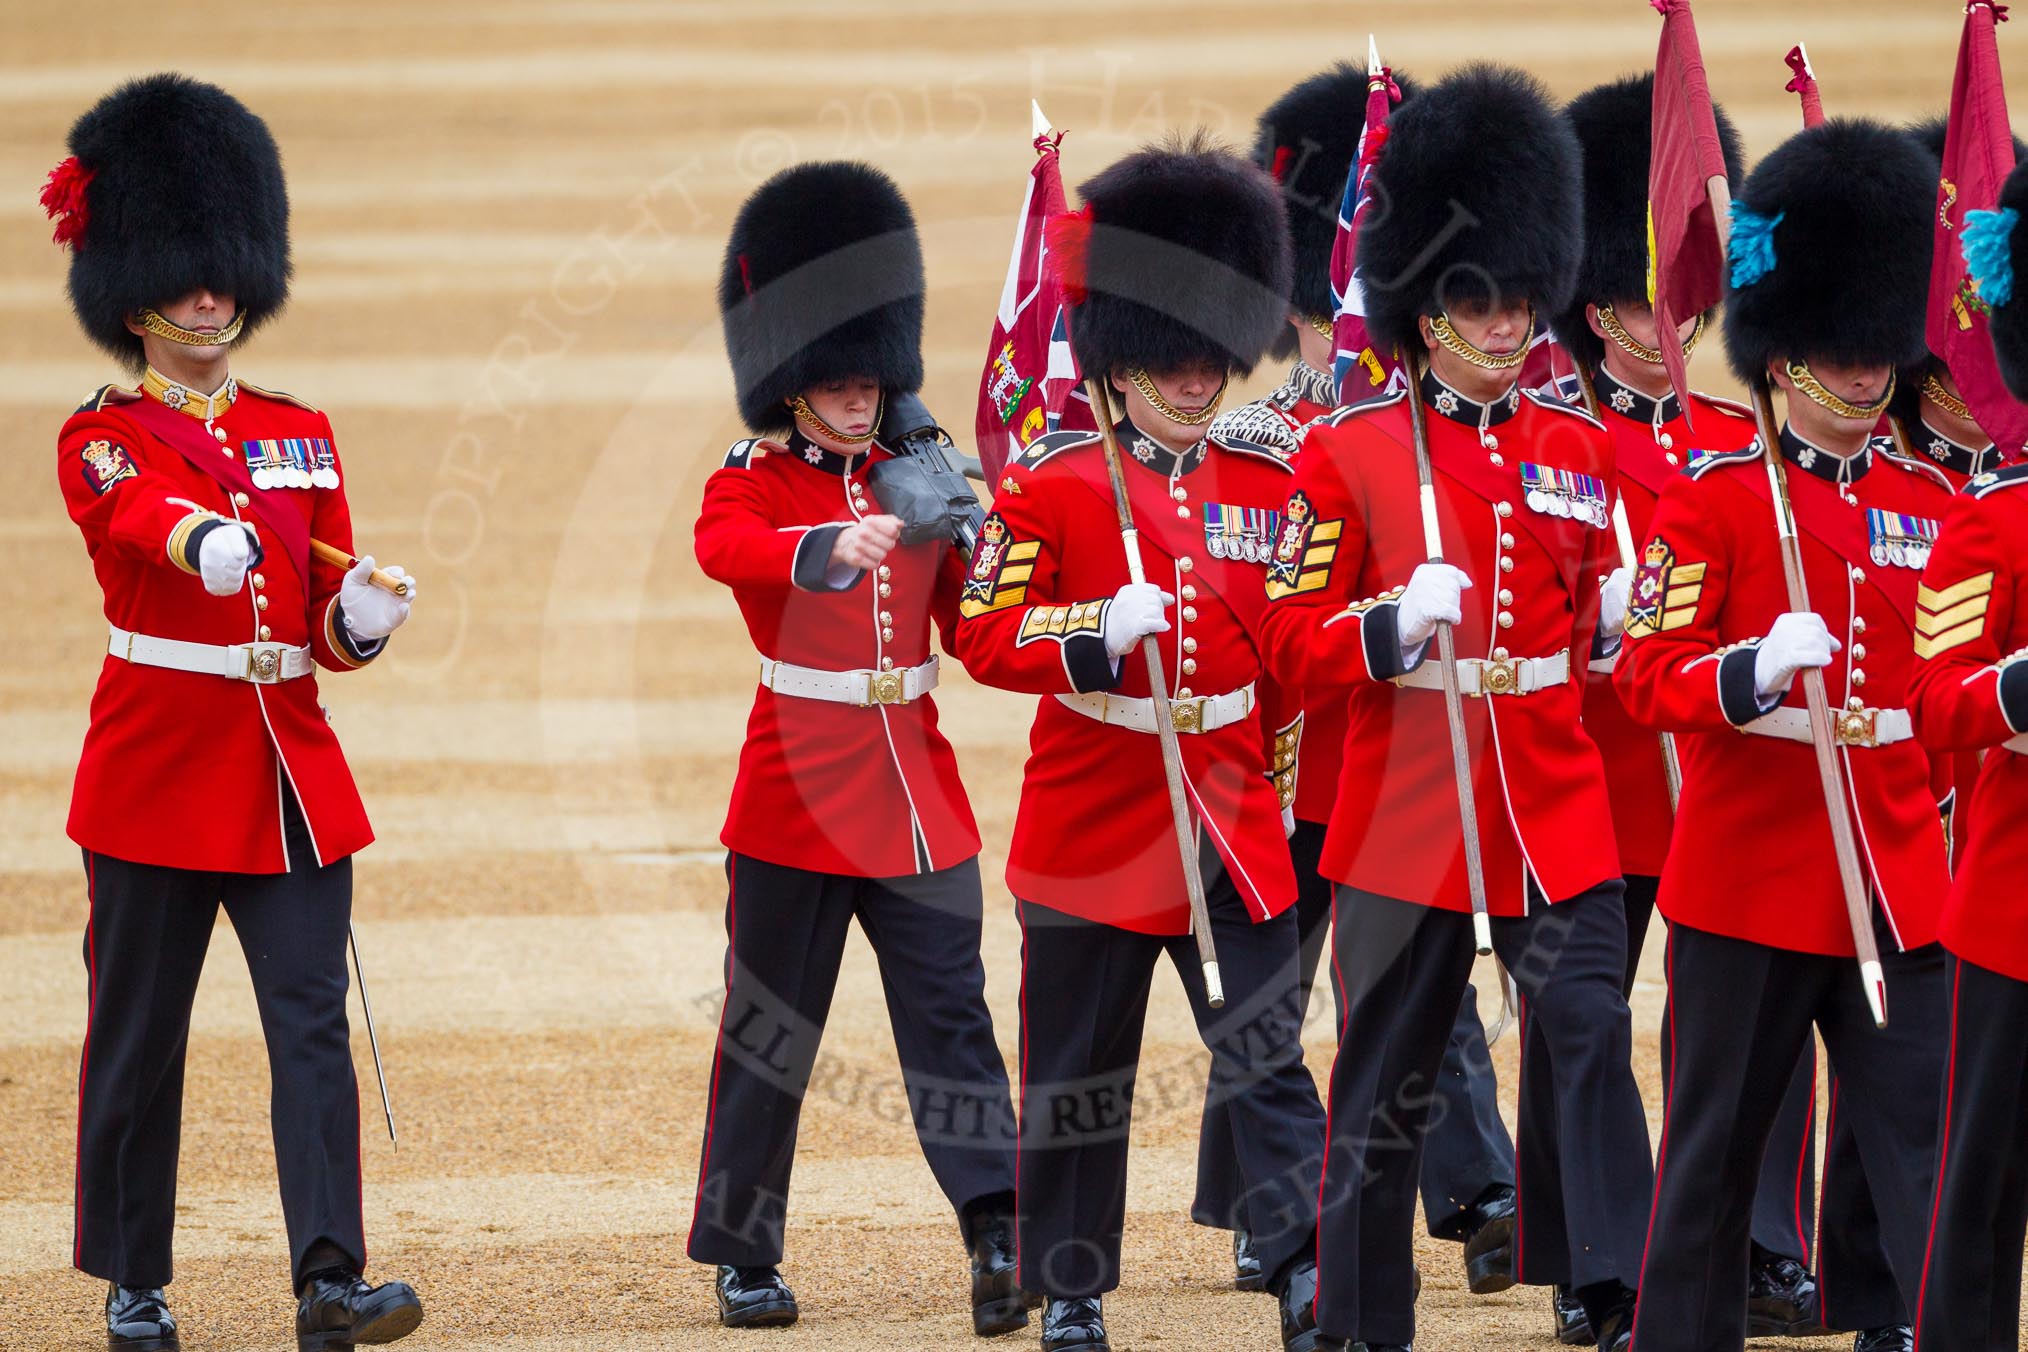 The Colonel's Review 2016.
Horse Guards Parade, Westminster,
London,

United Kingdom,
on 04 June 2016 at 09:53, image #19